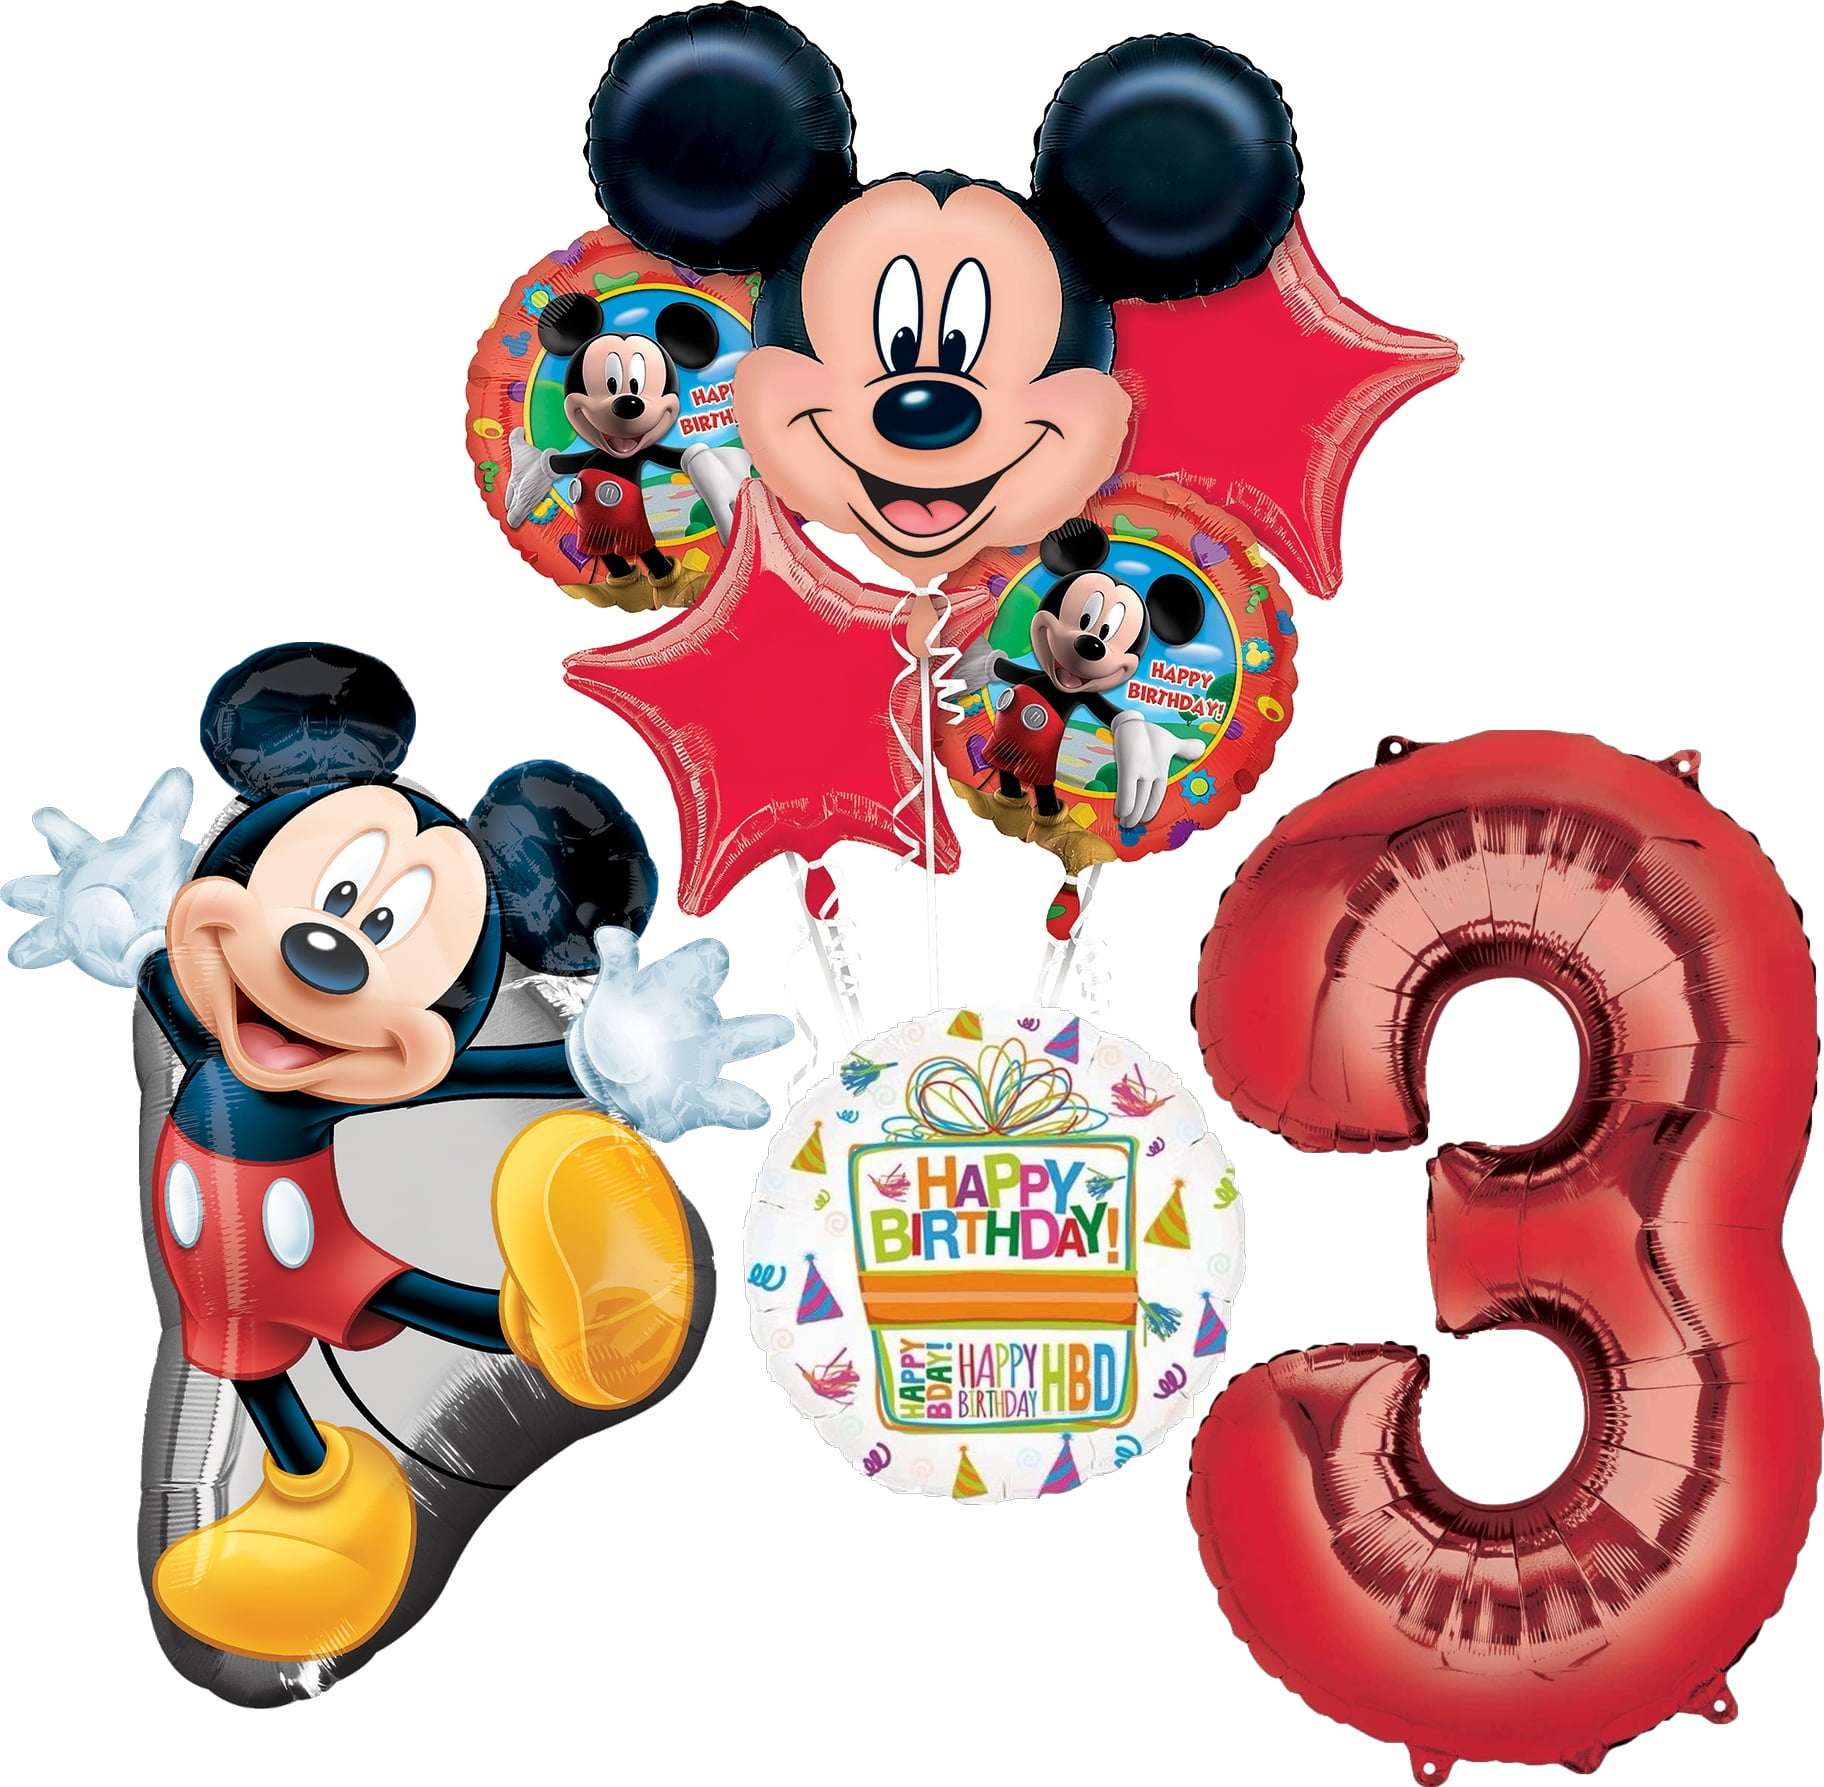 Disney Birthday Banner PERSONALISED 5'/ 6' Mickey Mouse